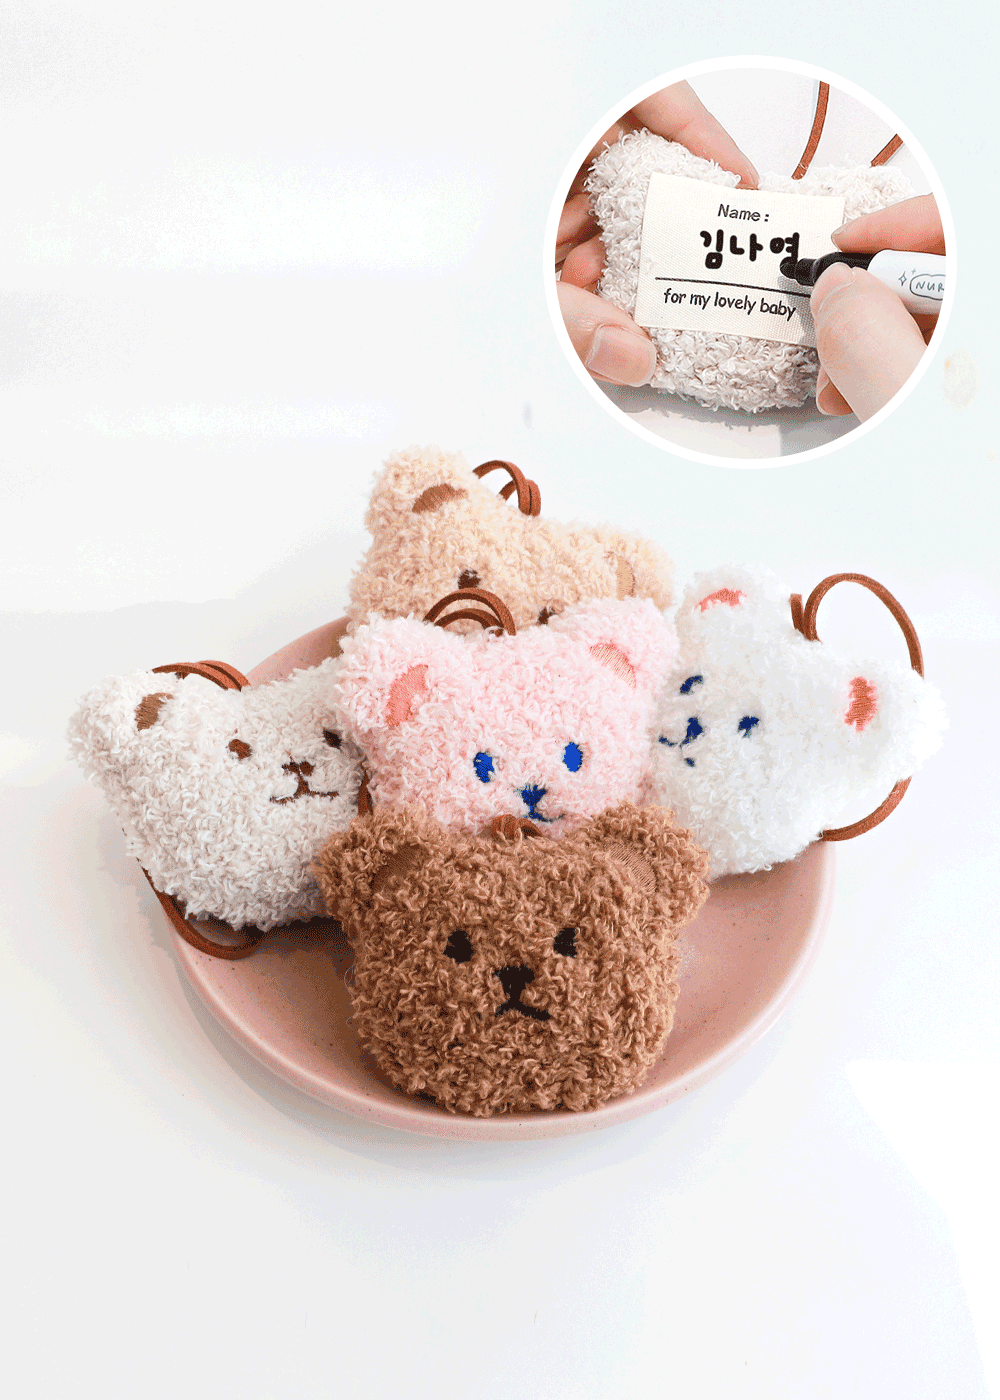 Bubbly teddy bear name tag to prevent loss of dolls.